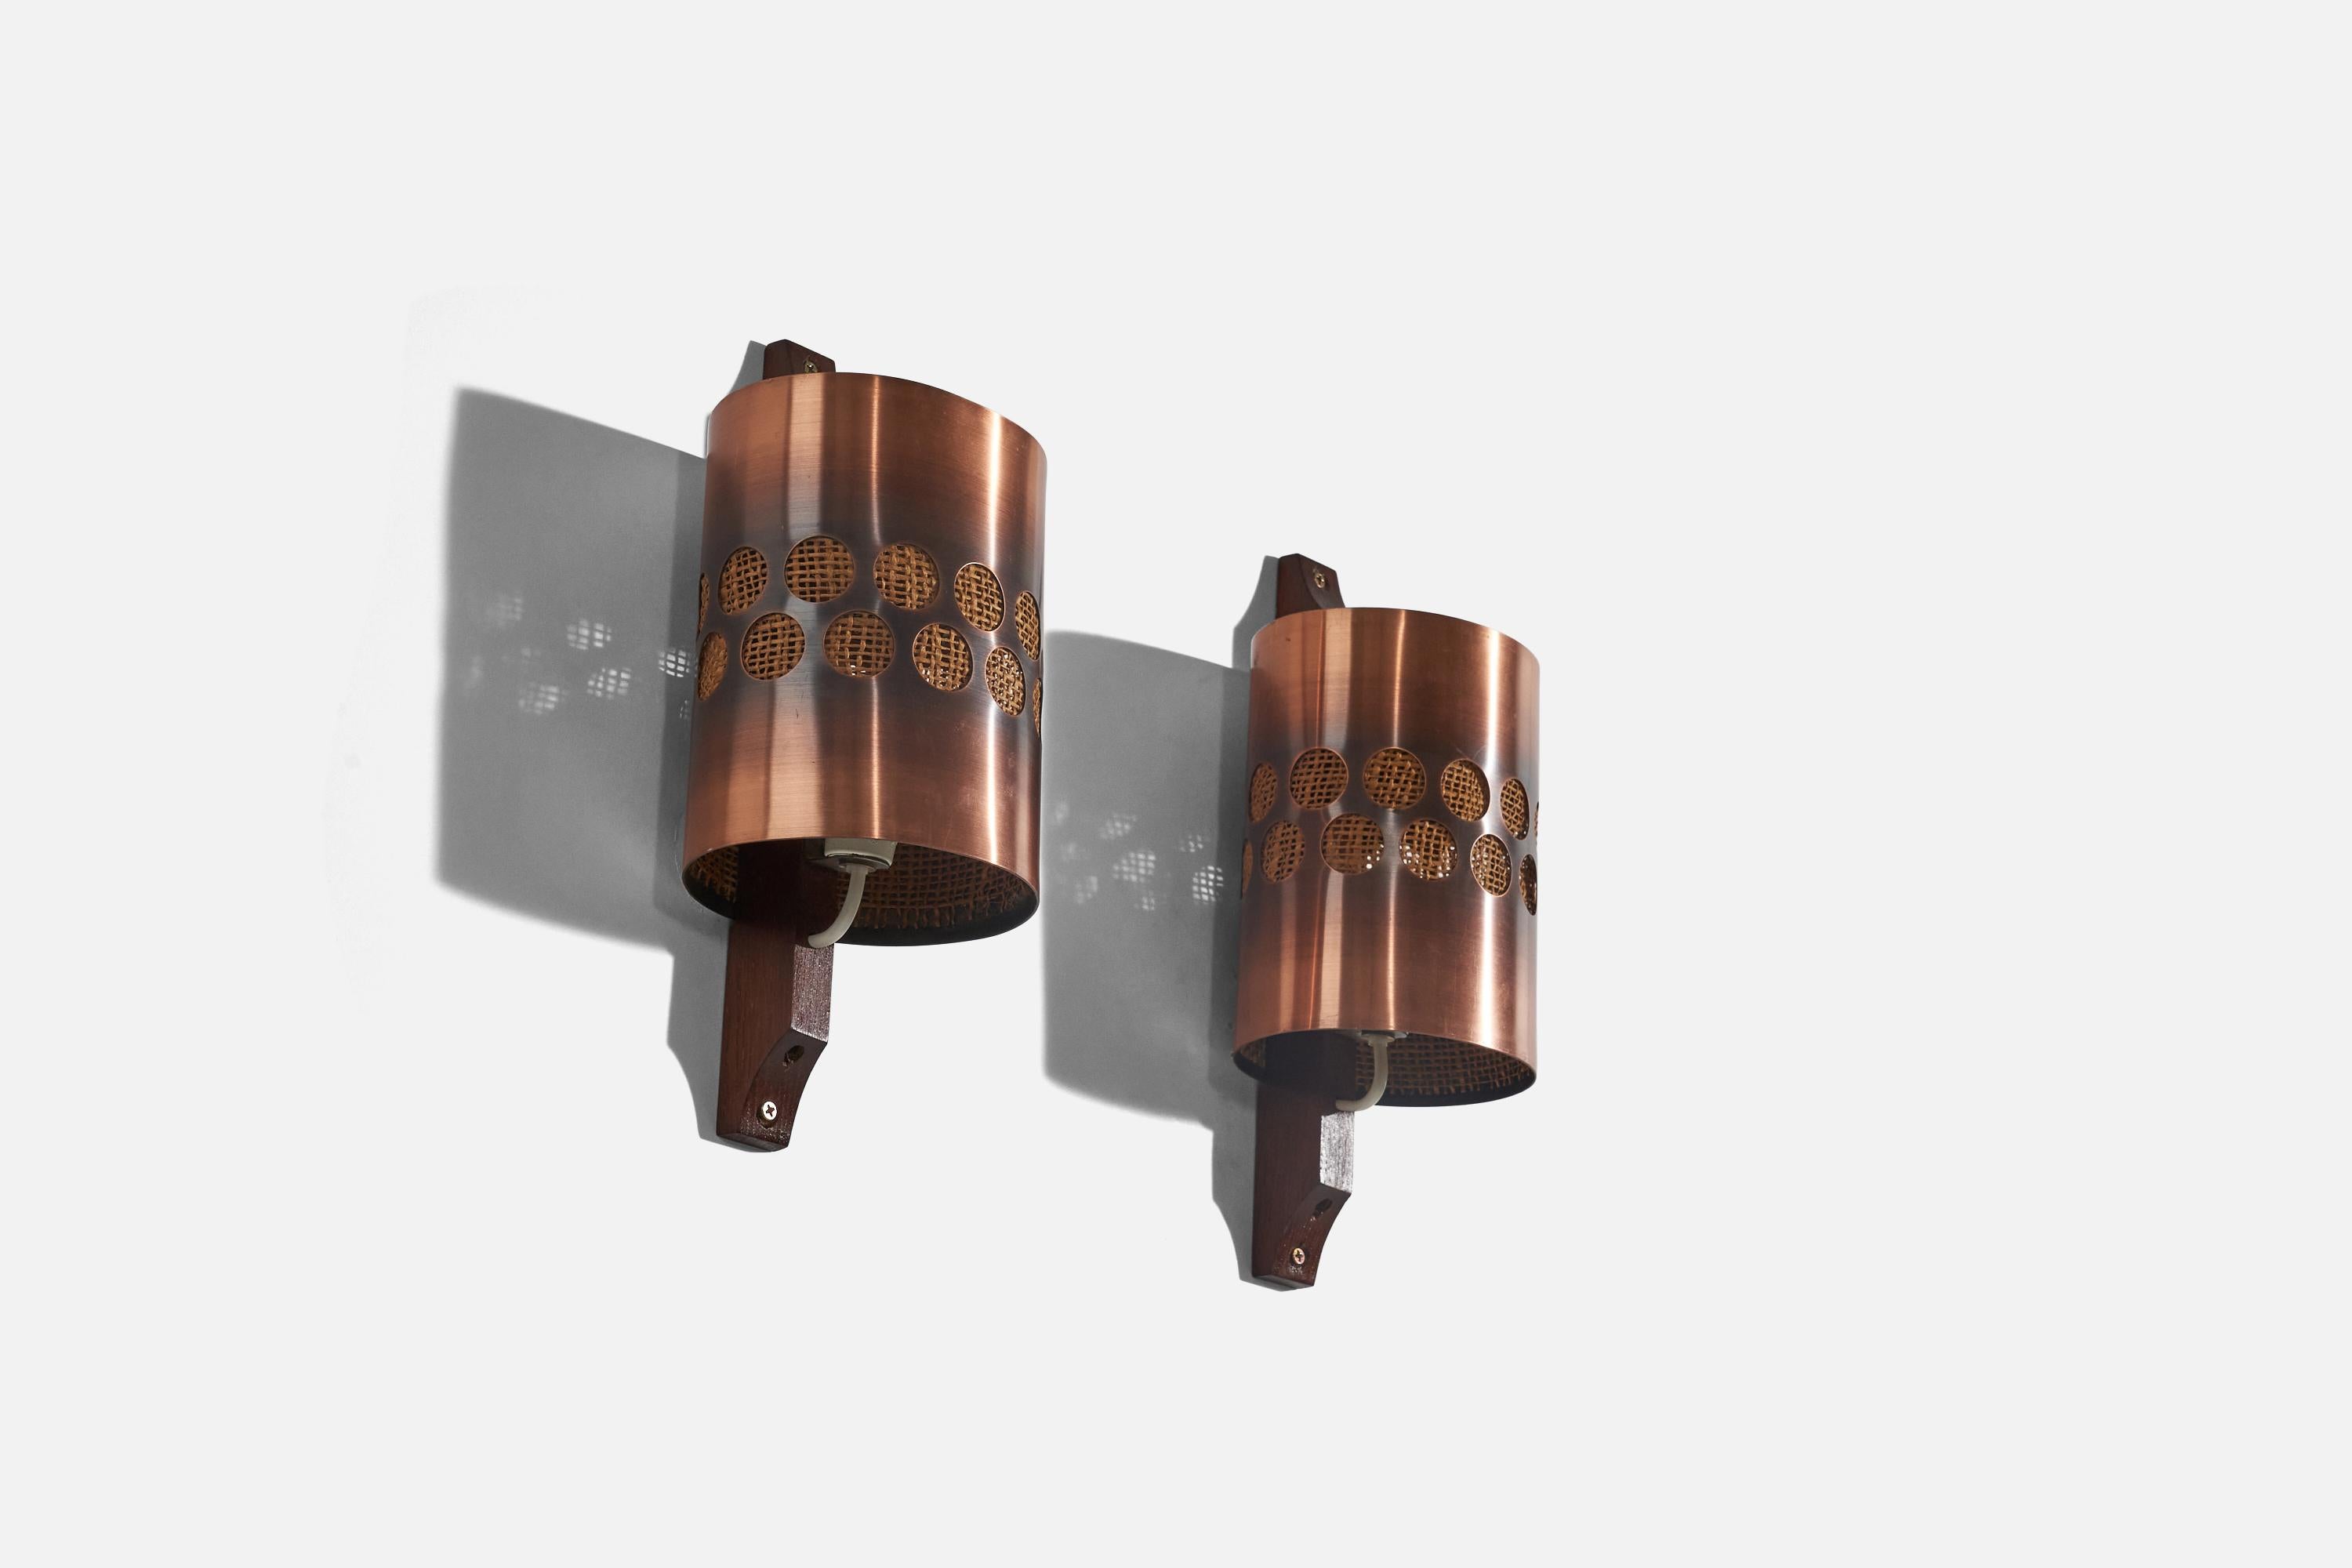 A pair of oak, copper and raffia wall lights designed and produced by Nils H. Ledung, Sweden, 1960s.

Fixture is set as a hardwire or plug-in. 
Socket takes E-14 bulb.
There is no maximum wattage stated on the fixture. 